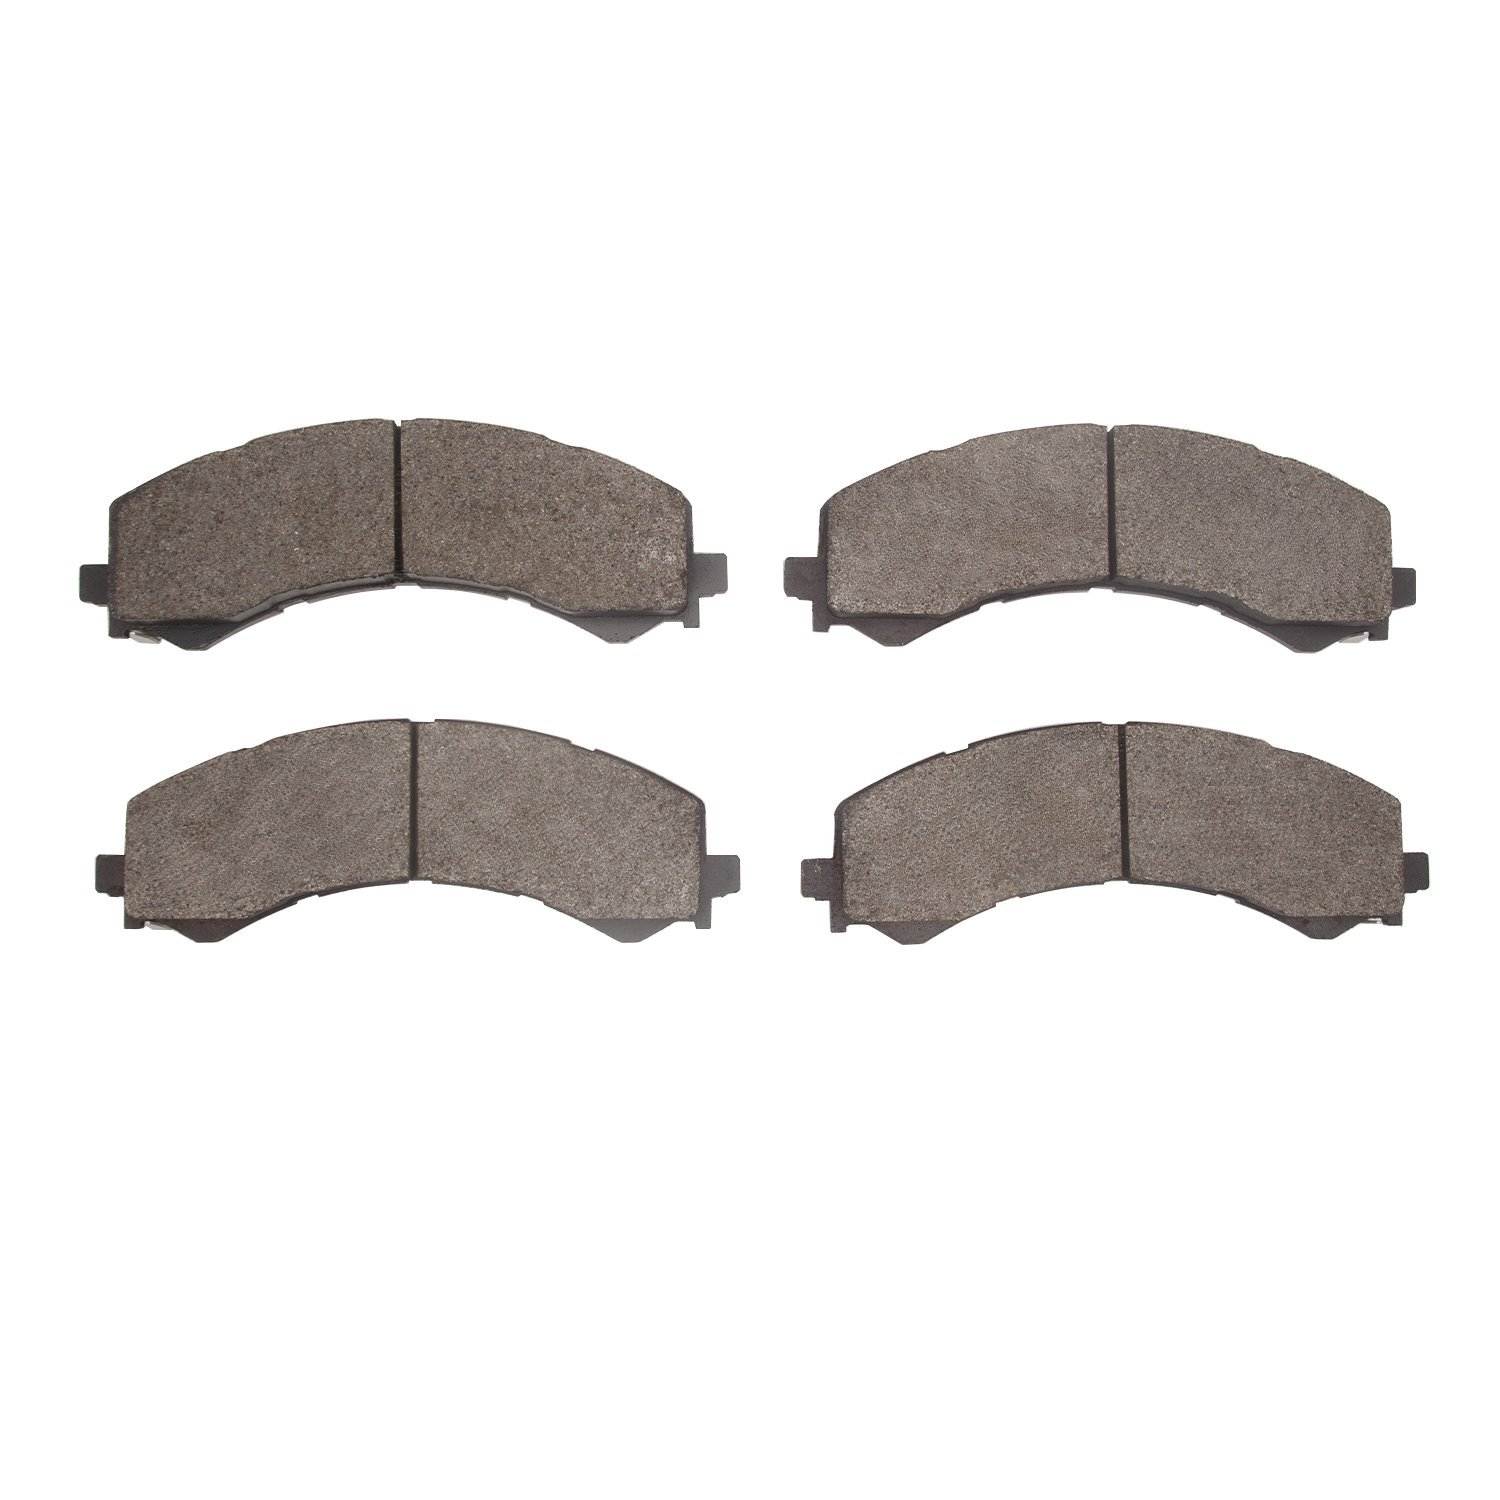 Super-Duty Brake Pads, Fits Select GM, Position: Rear